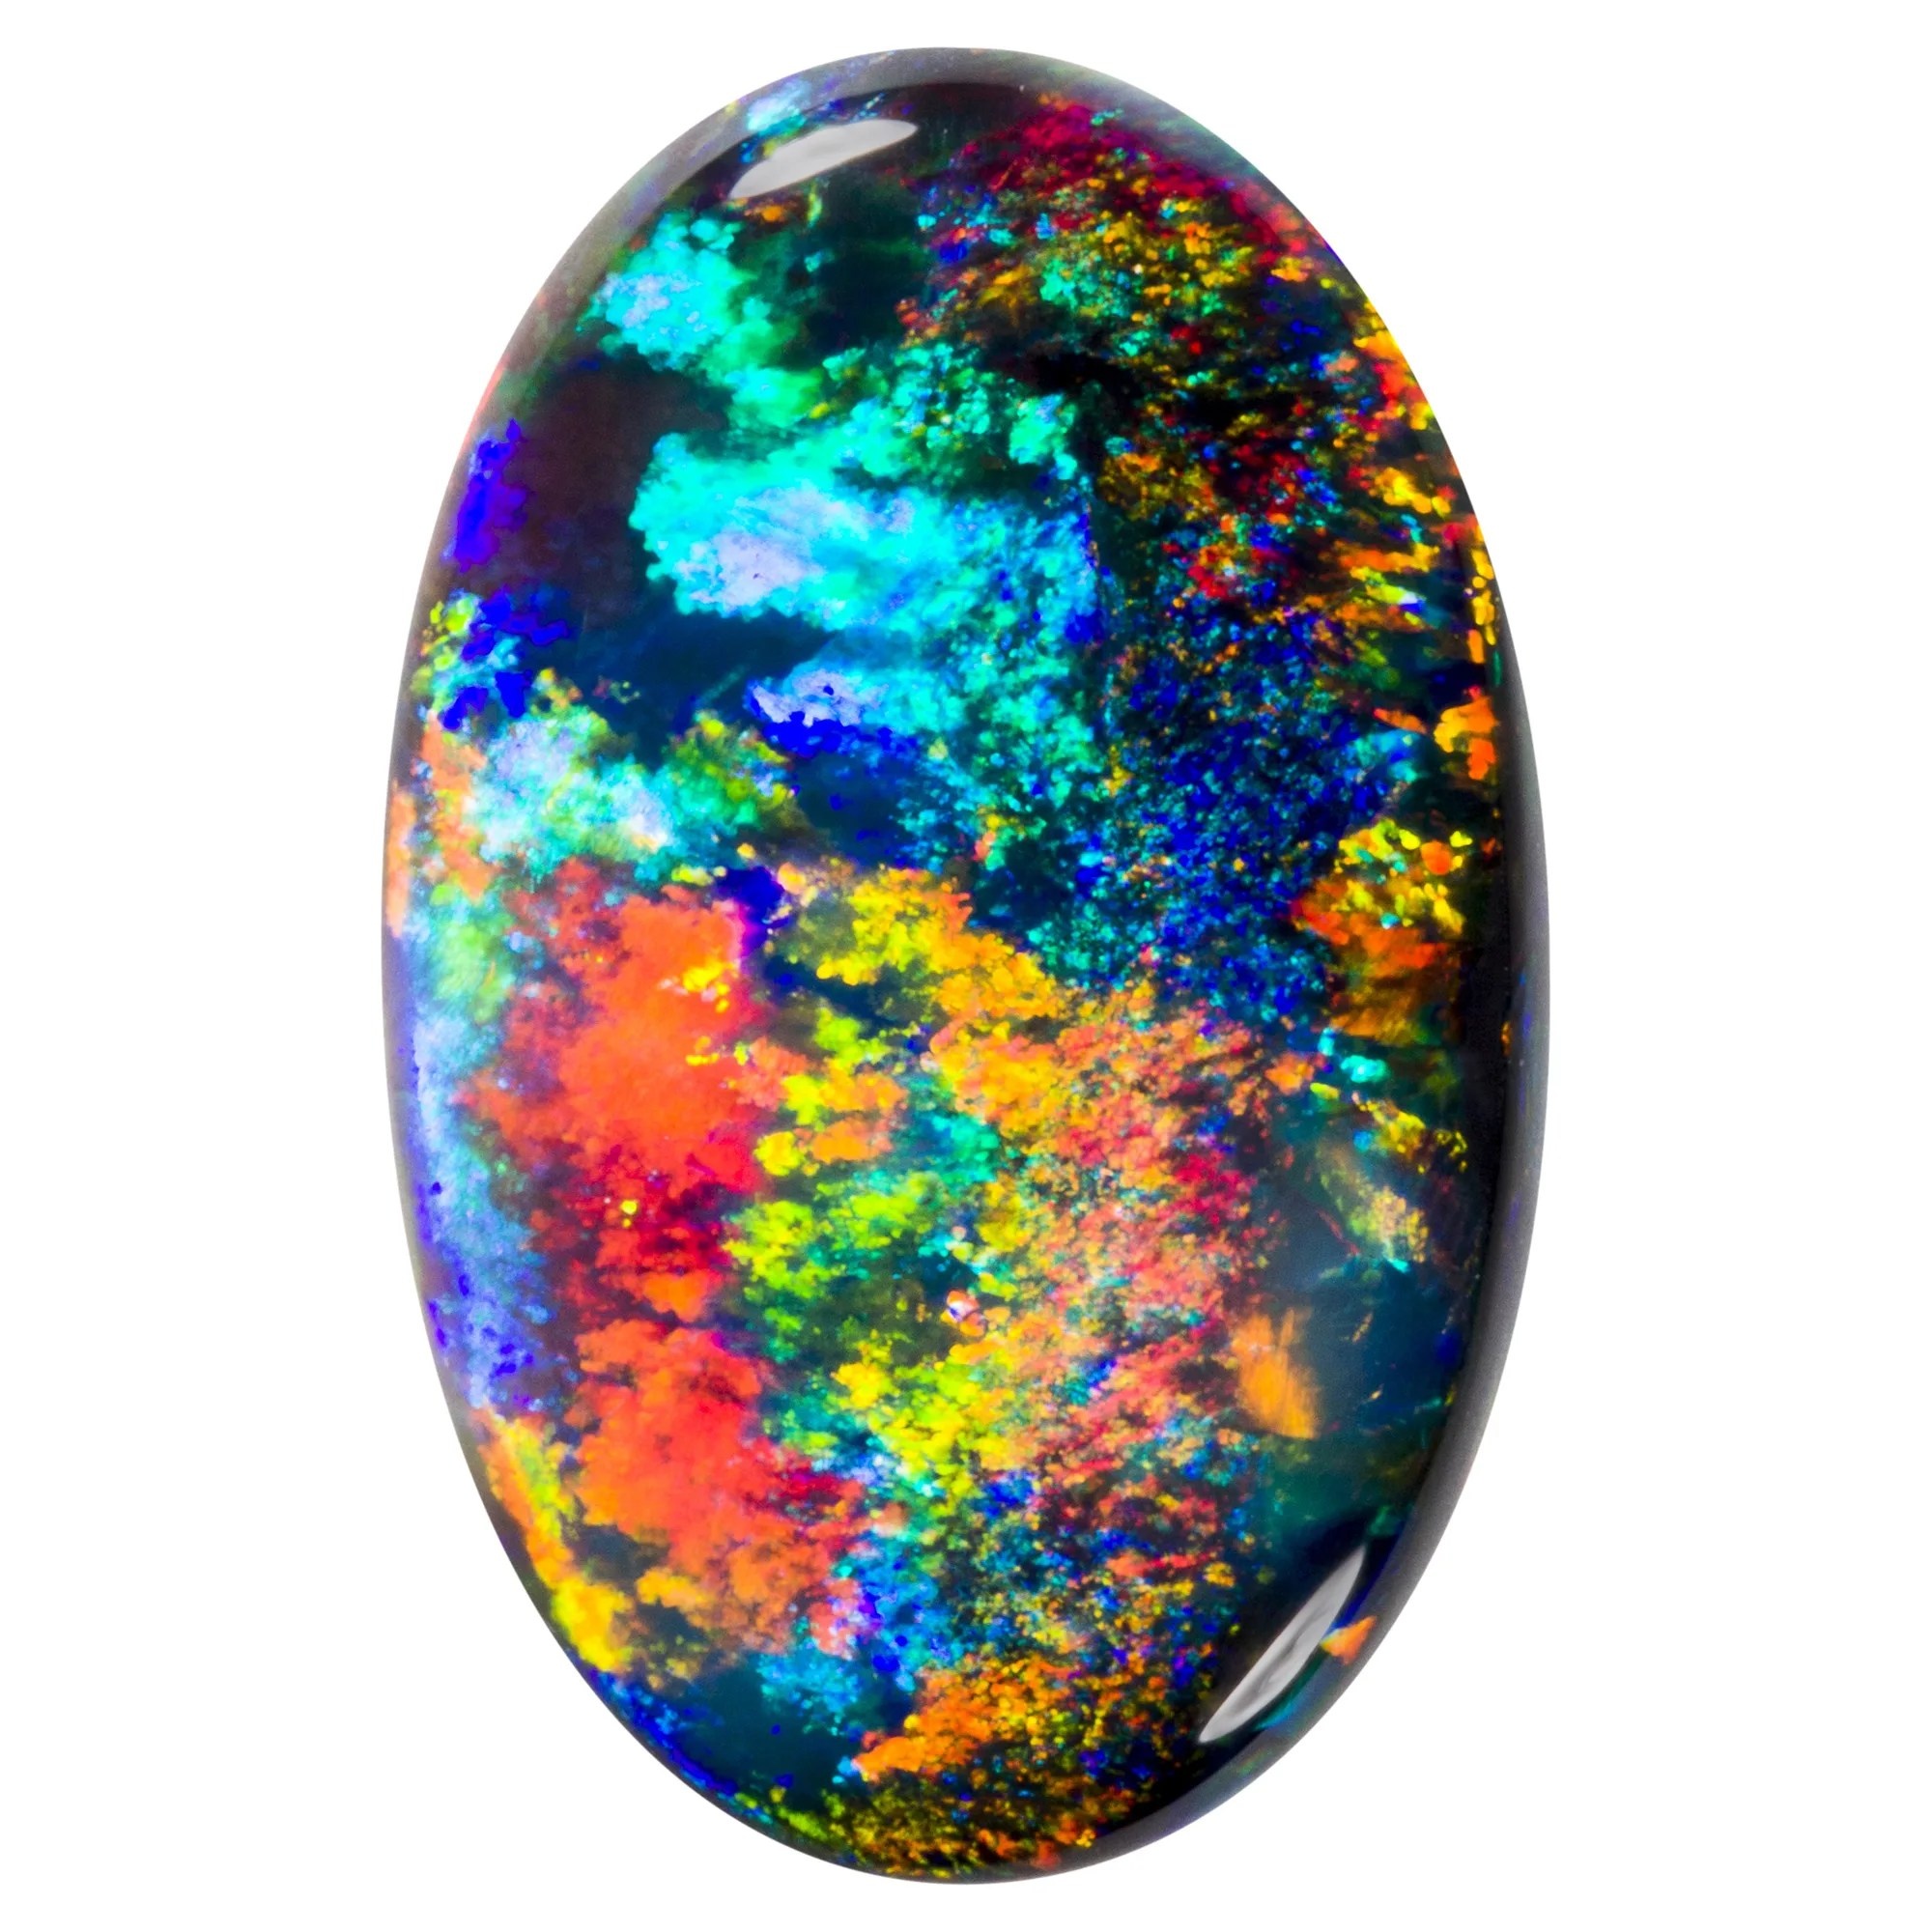 Types of opal, Australian opal jewelry, Precious gemstones, Unique colors and patterns, 2000x2000 HD Handy